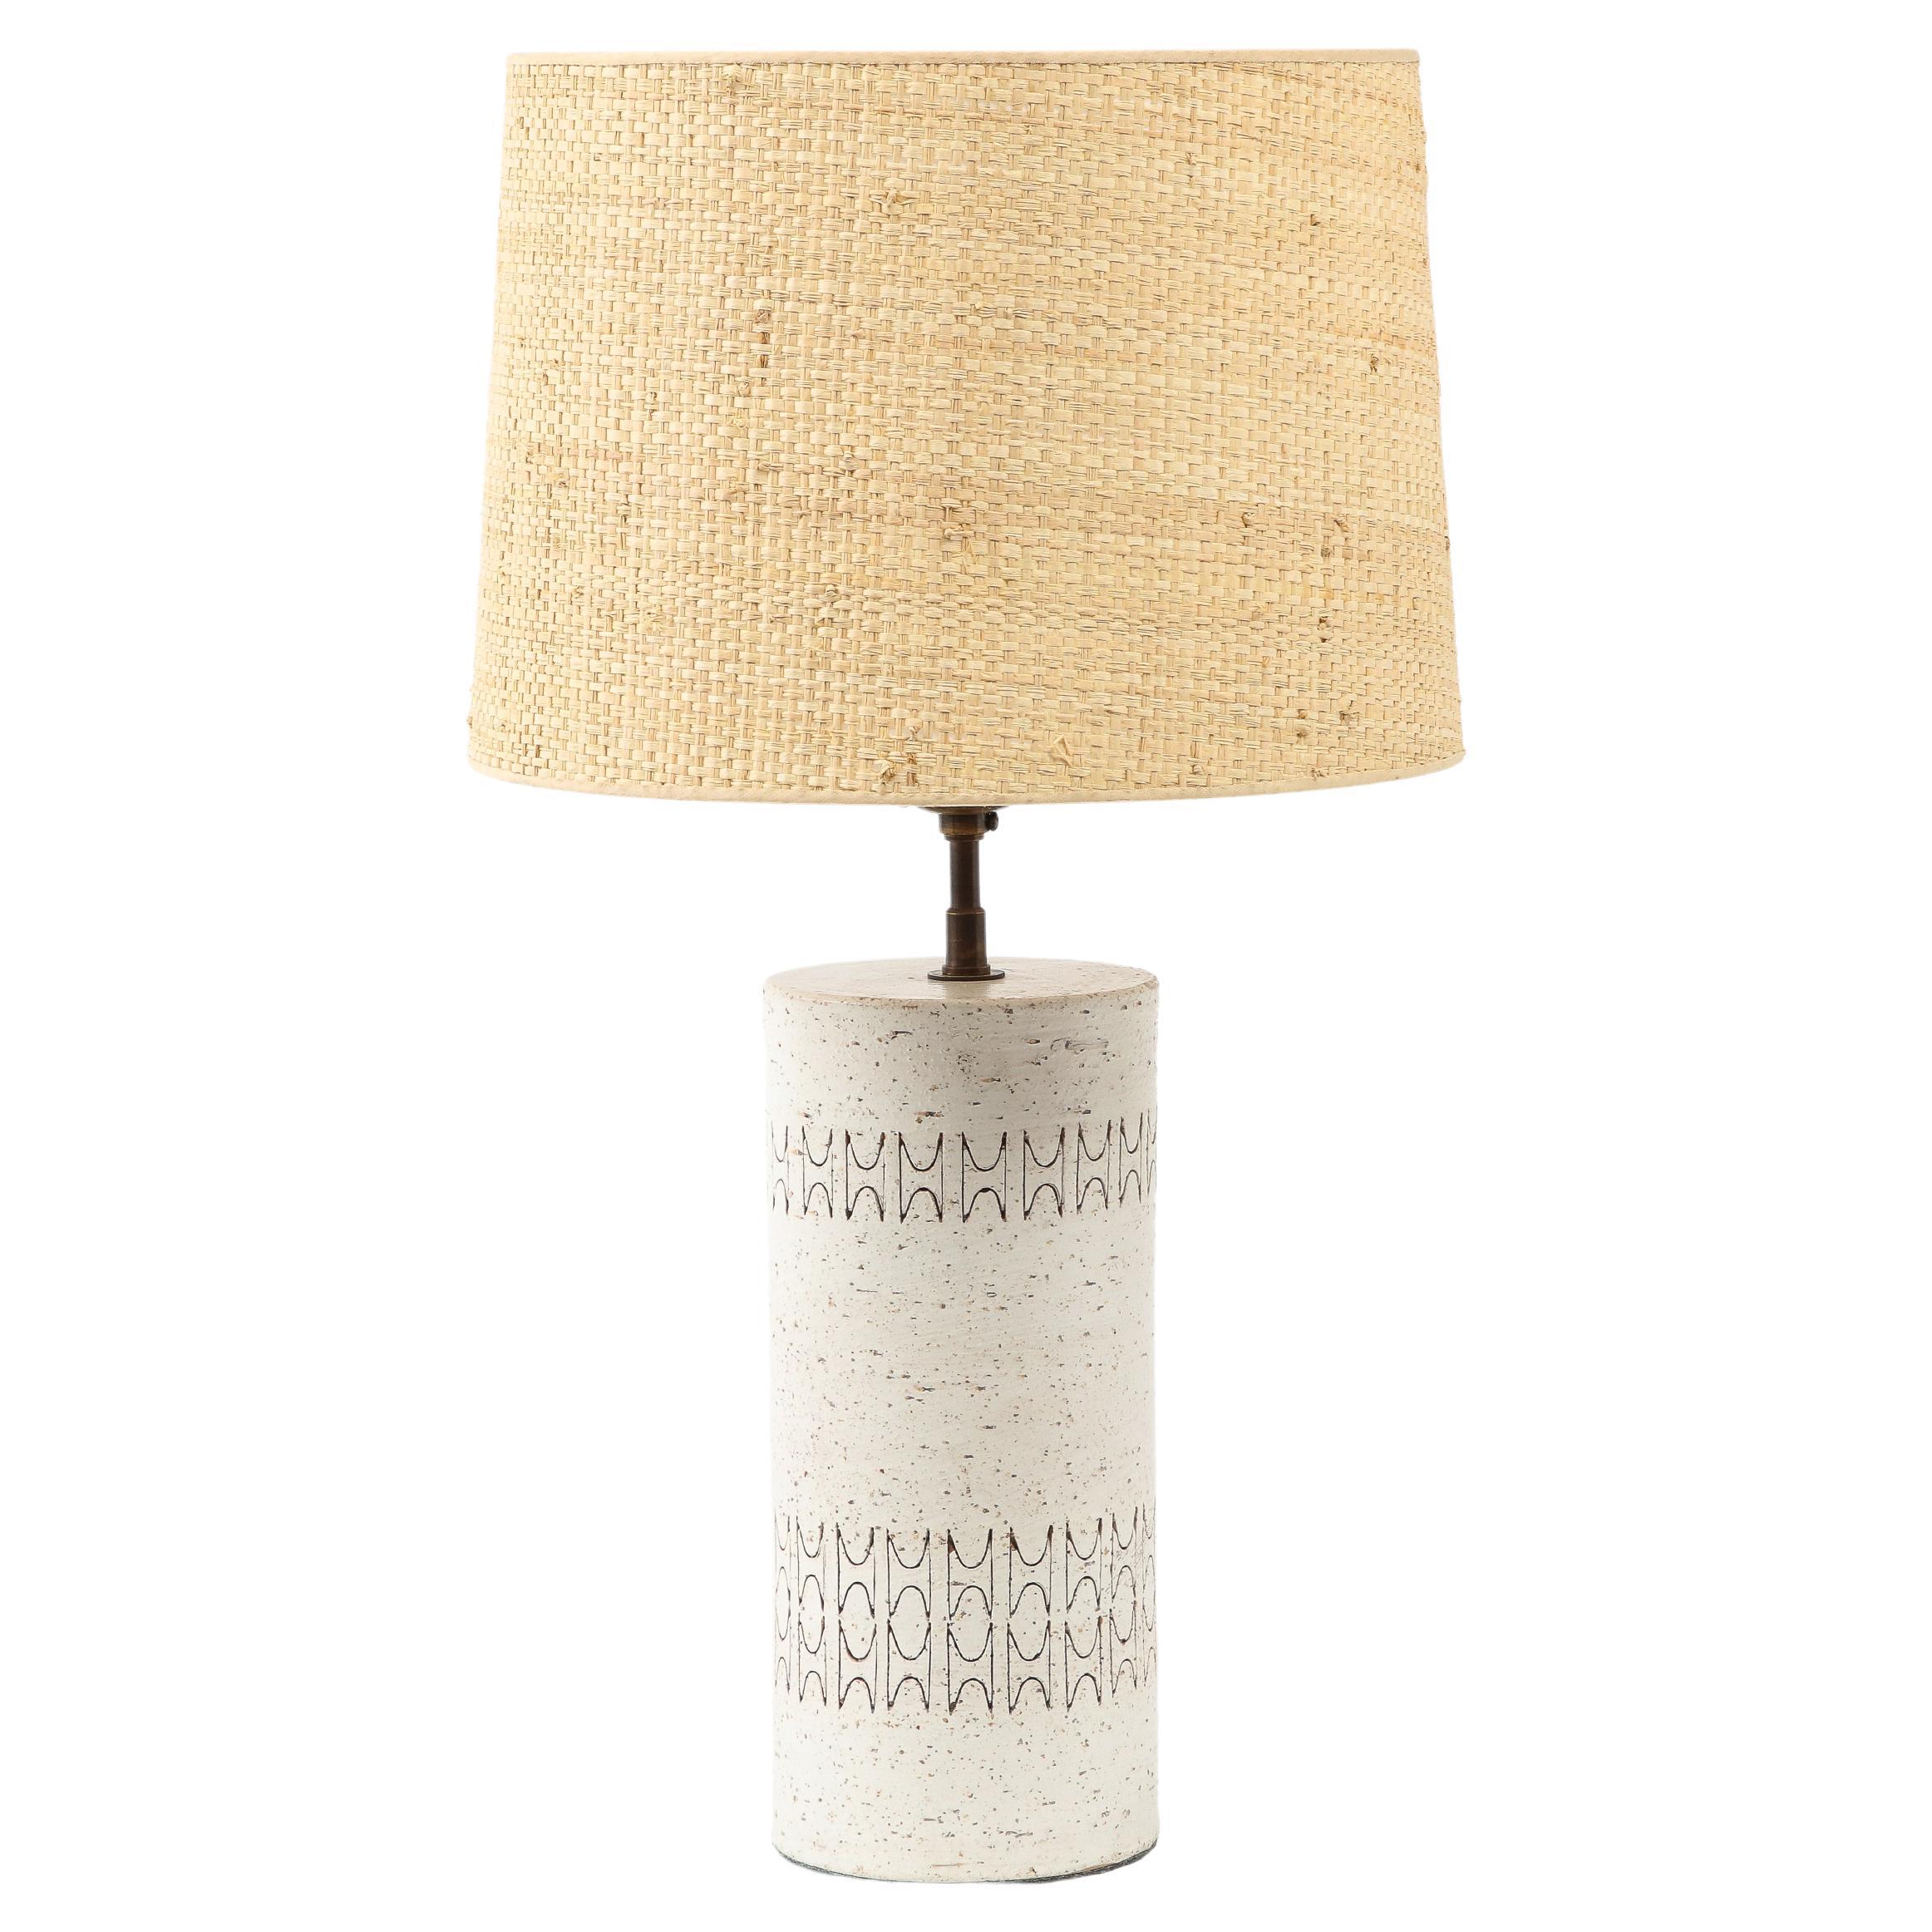 Bitossi off White Incised Ceramic Table Lamp, Italy 1960's For Sale